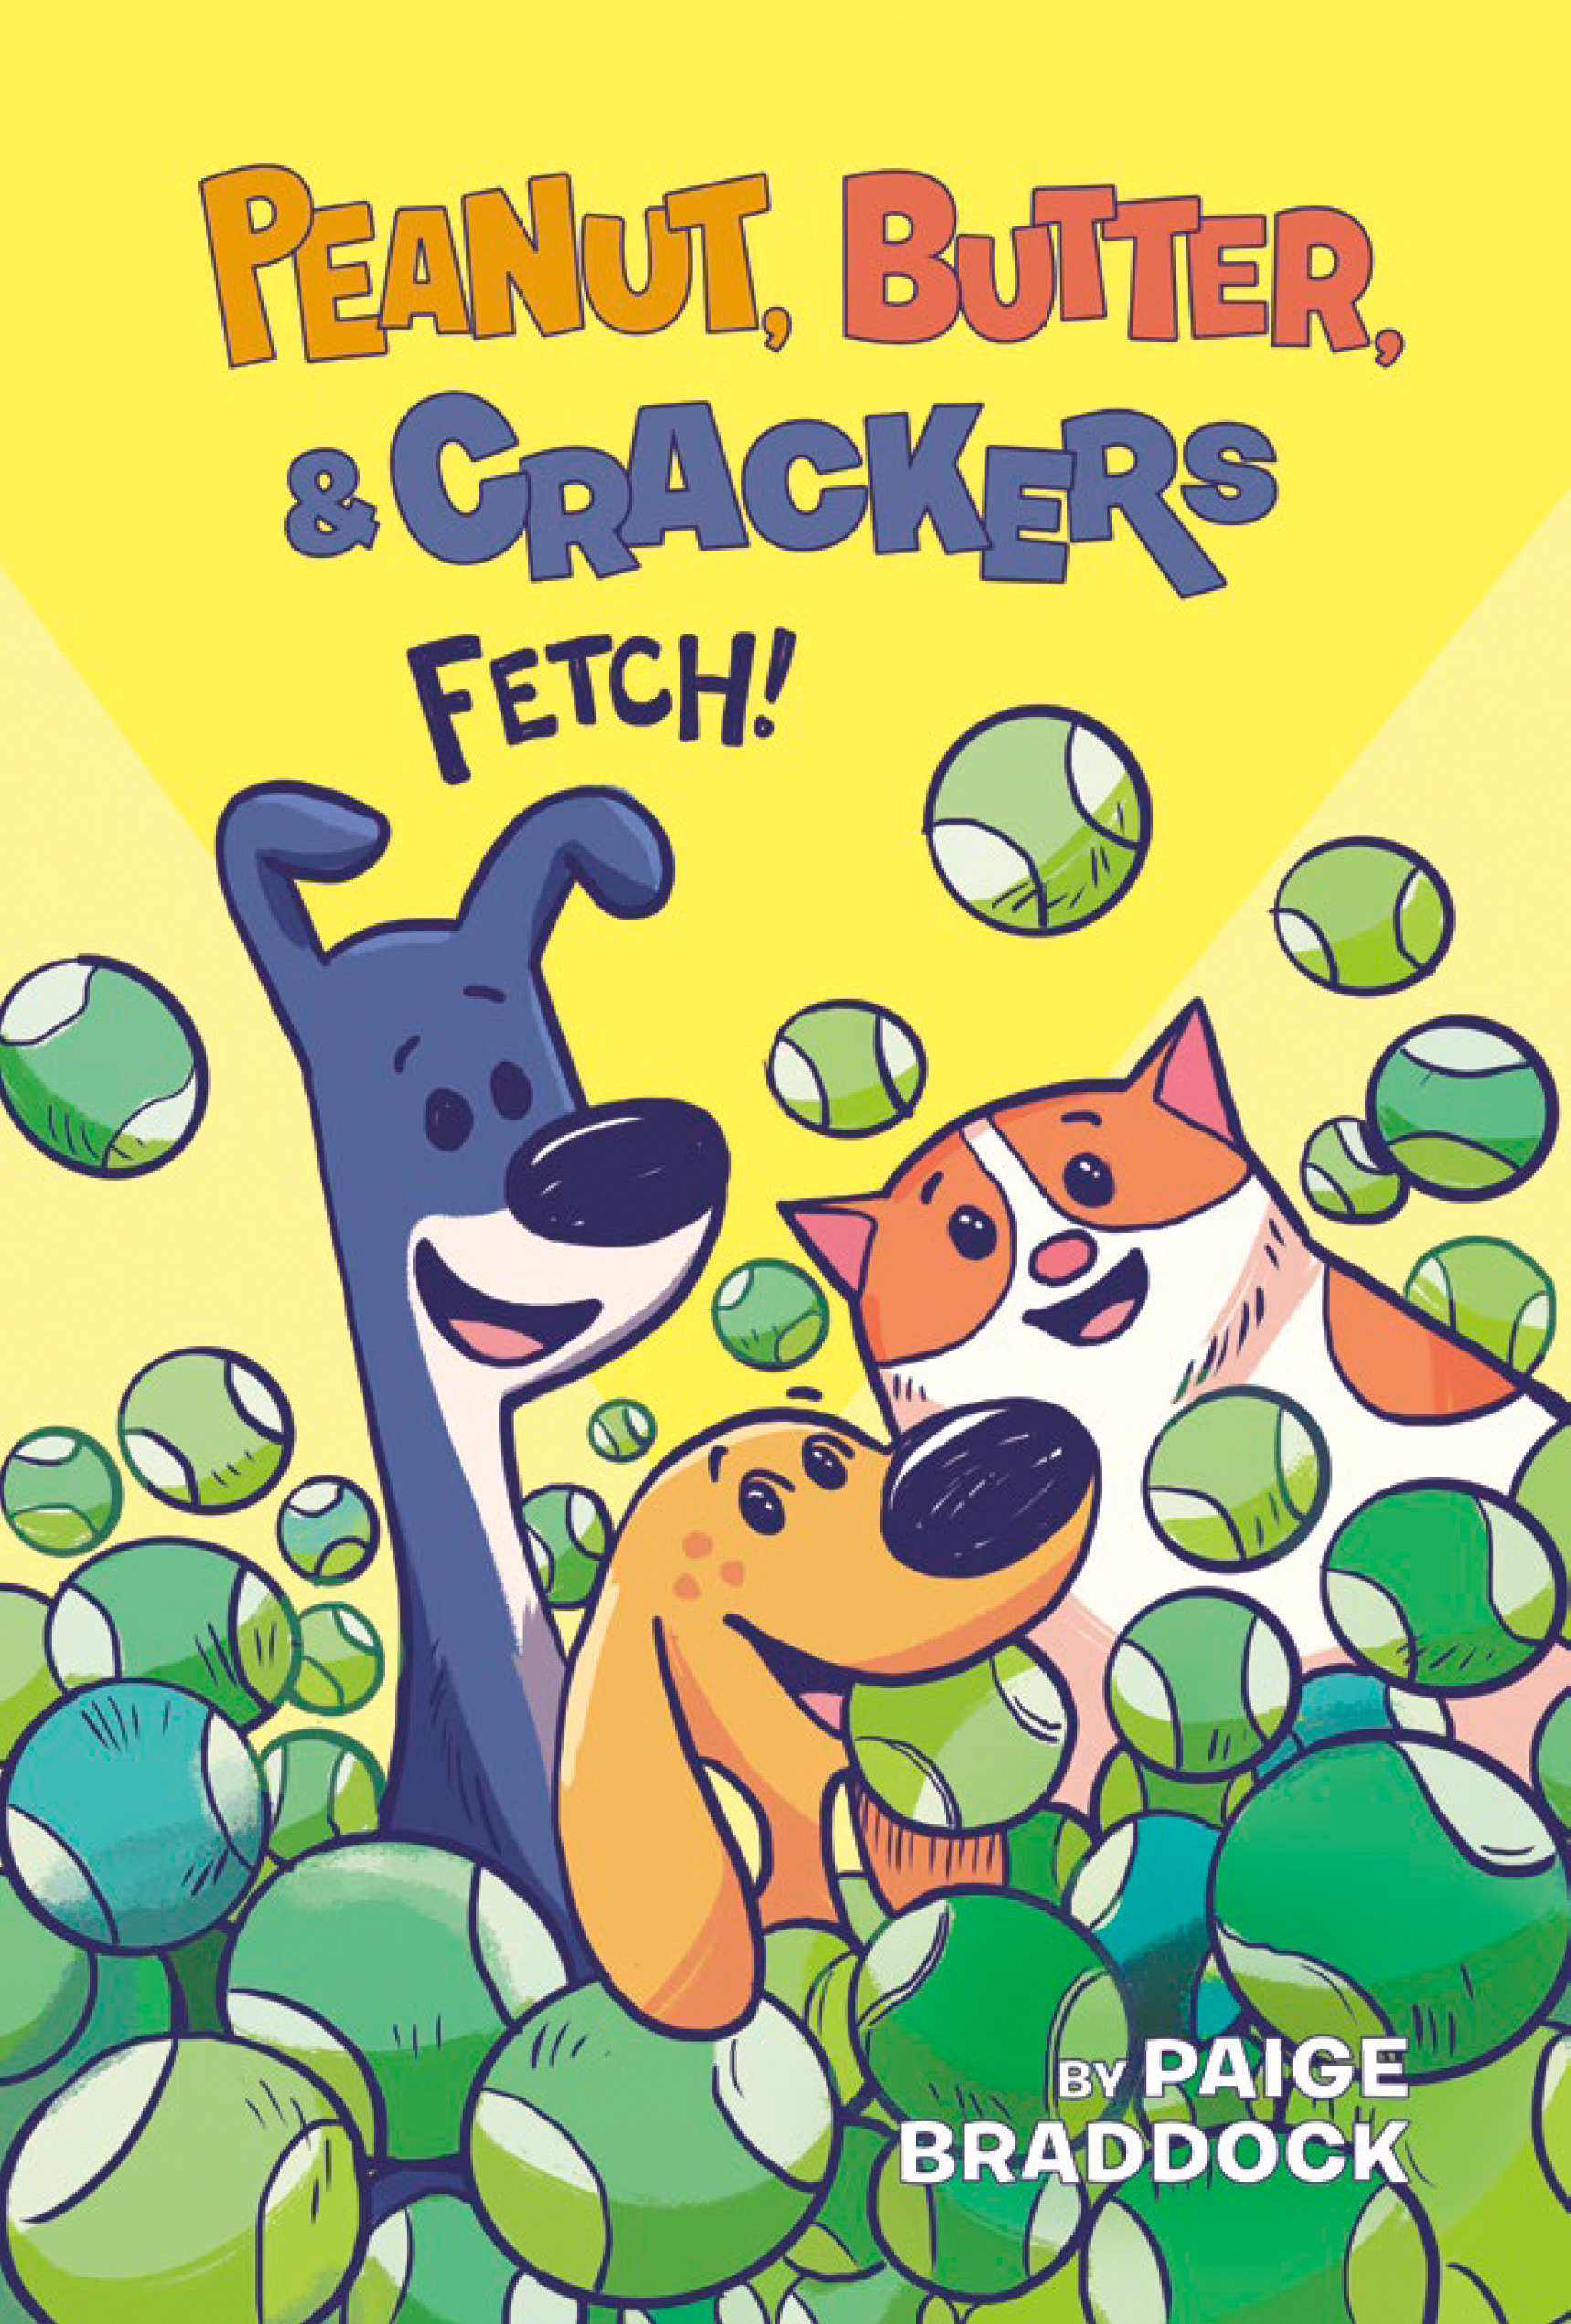 Peanut, Butter and Crackers - Fetch! | Graphic novel & Manga (children)